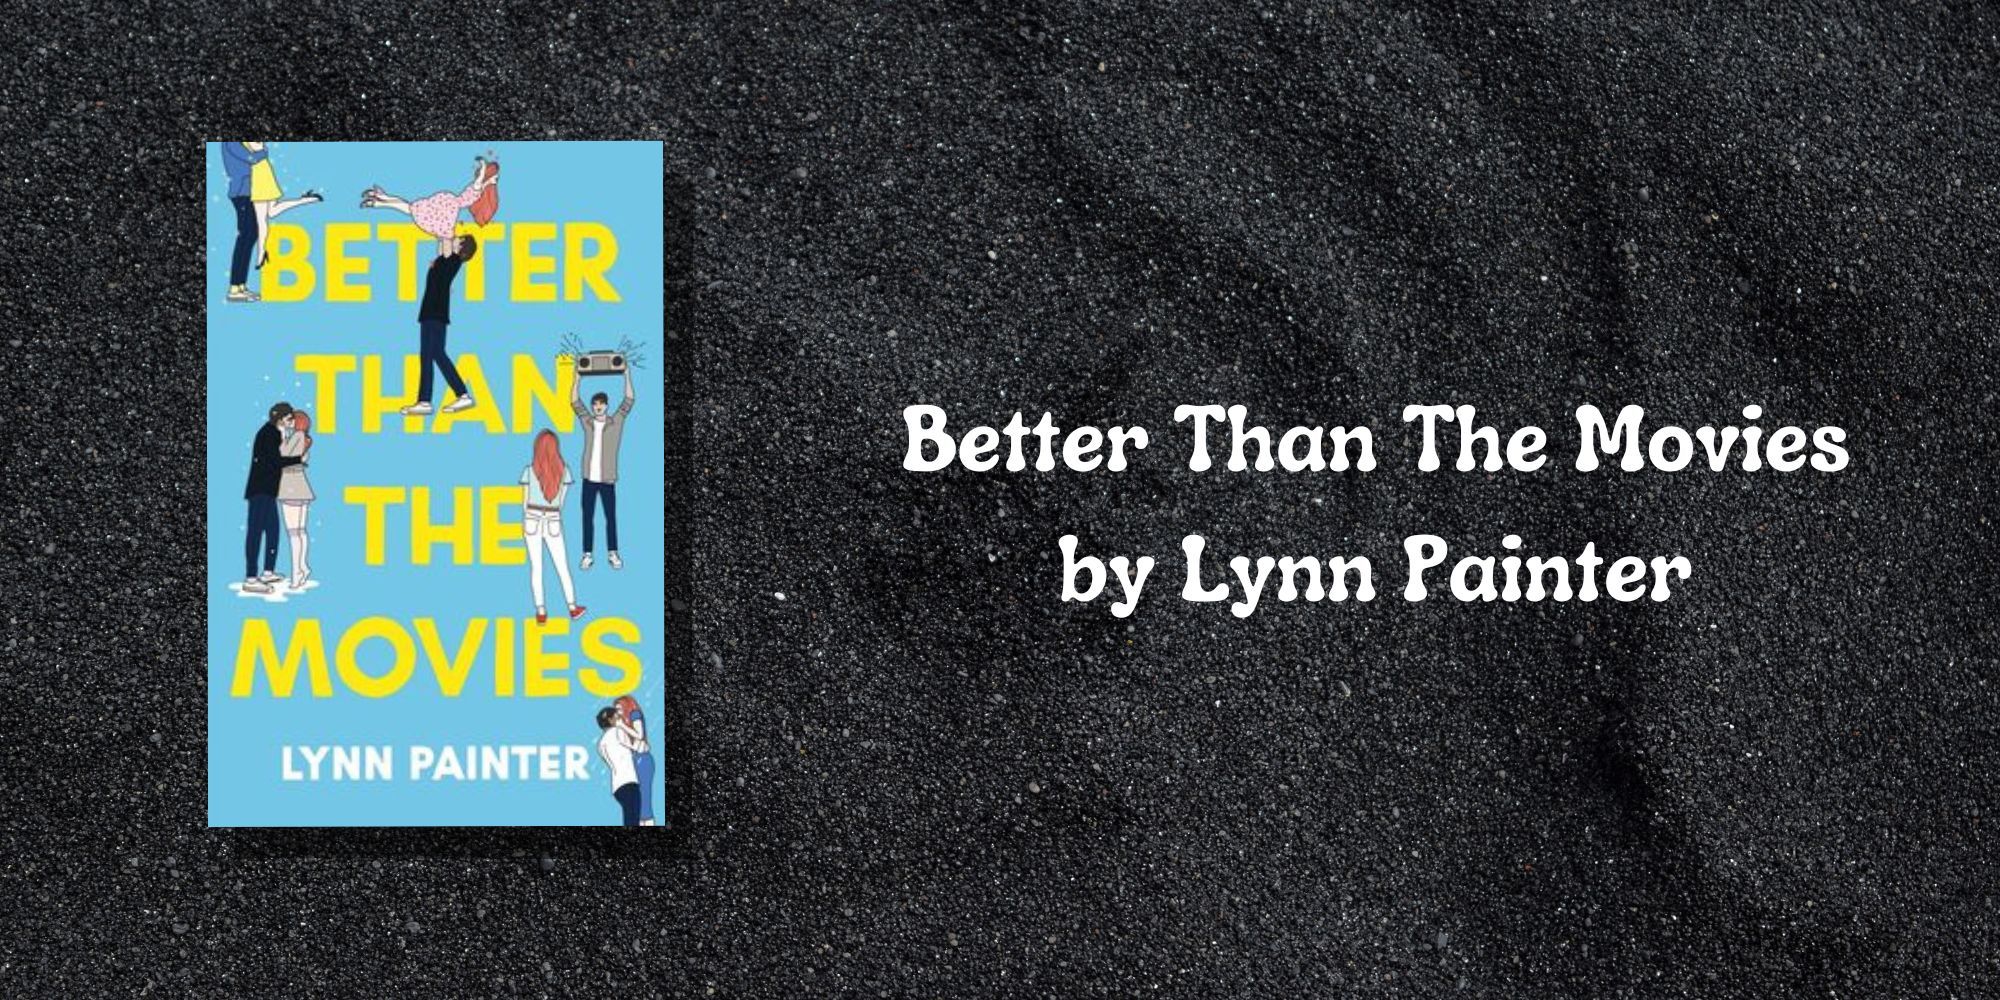 The cover of Better Than The Movies by Lynn Painter